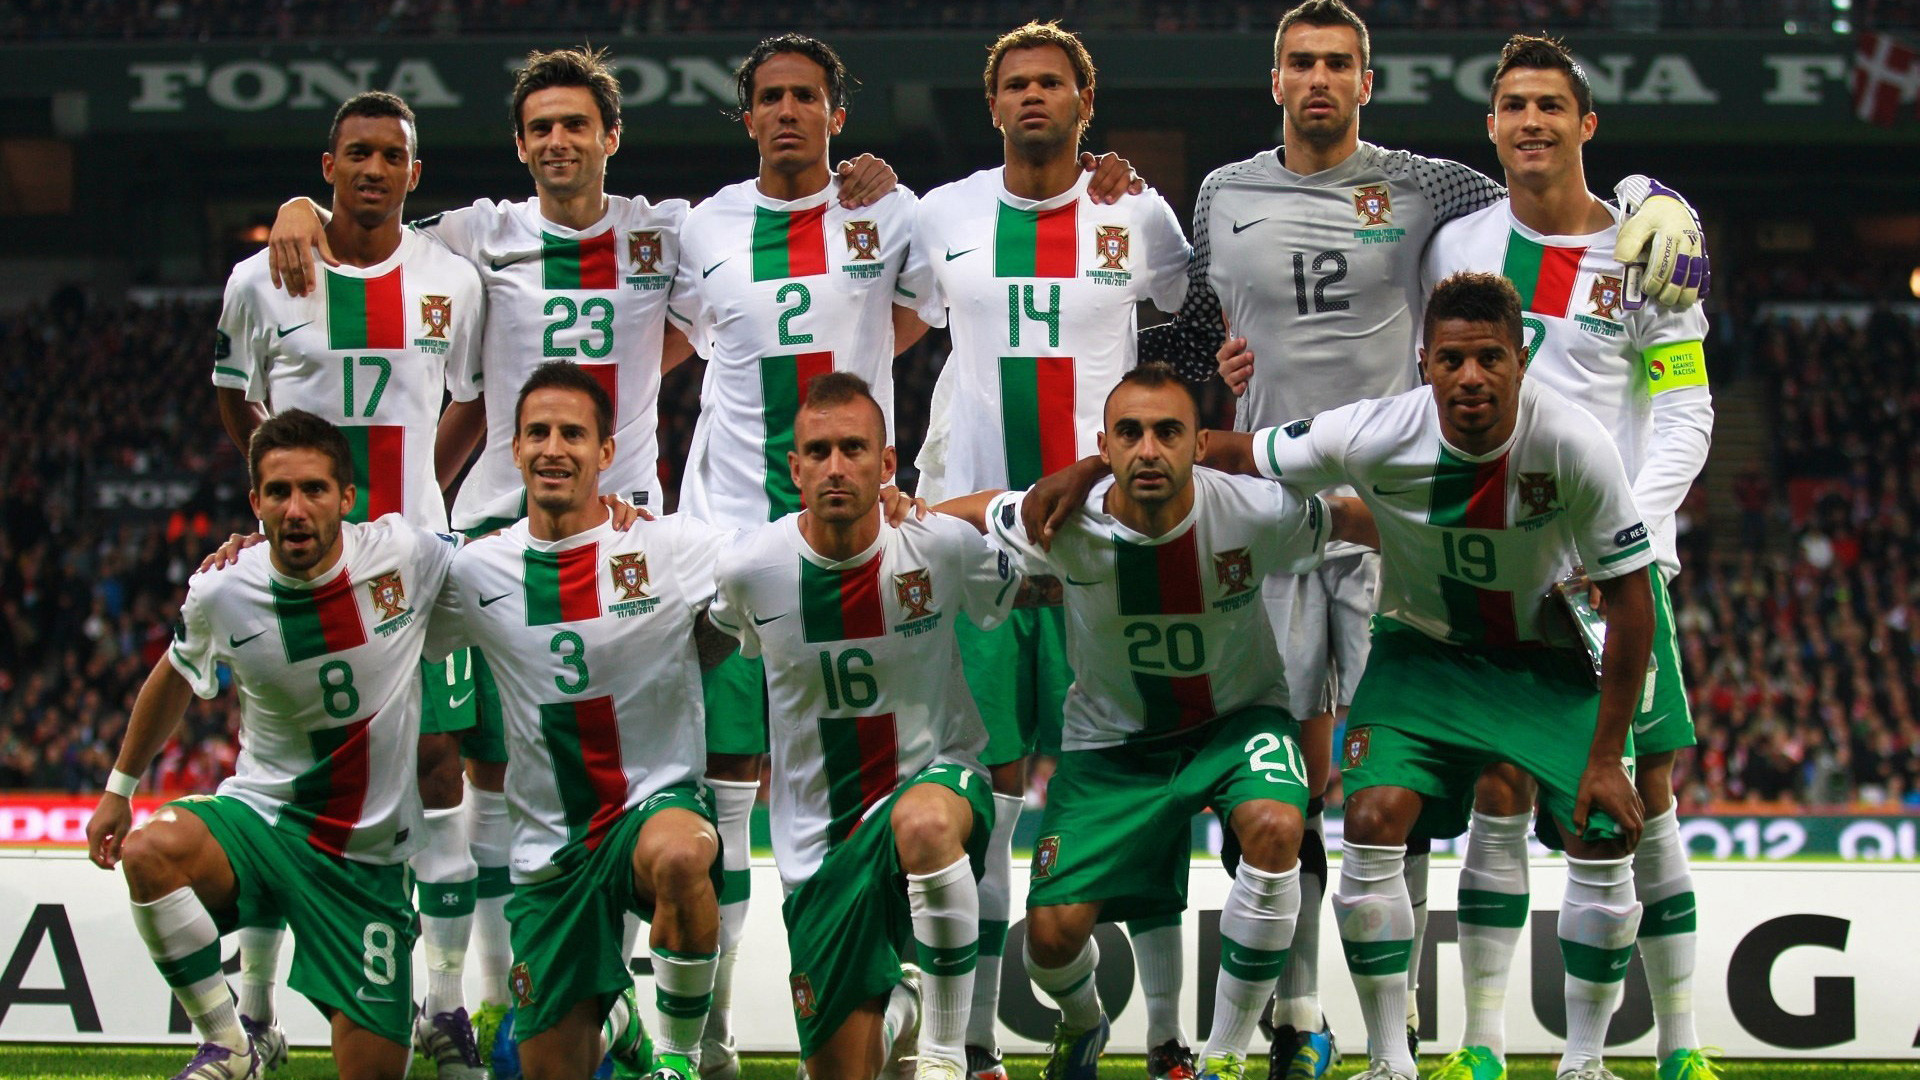 Mexico Soccer Wallpaper 2018 66 Images